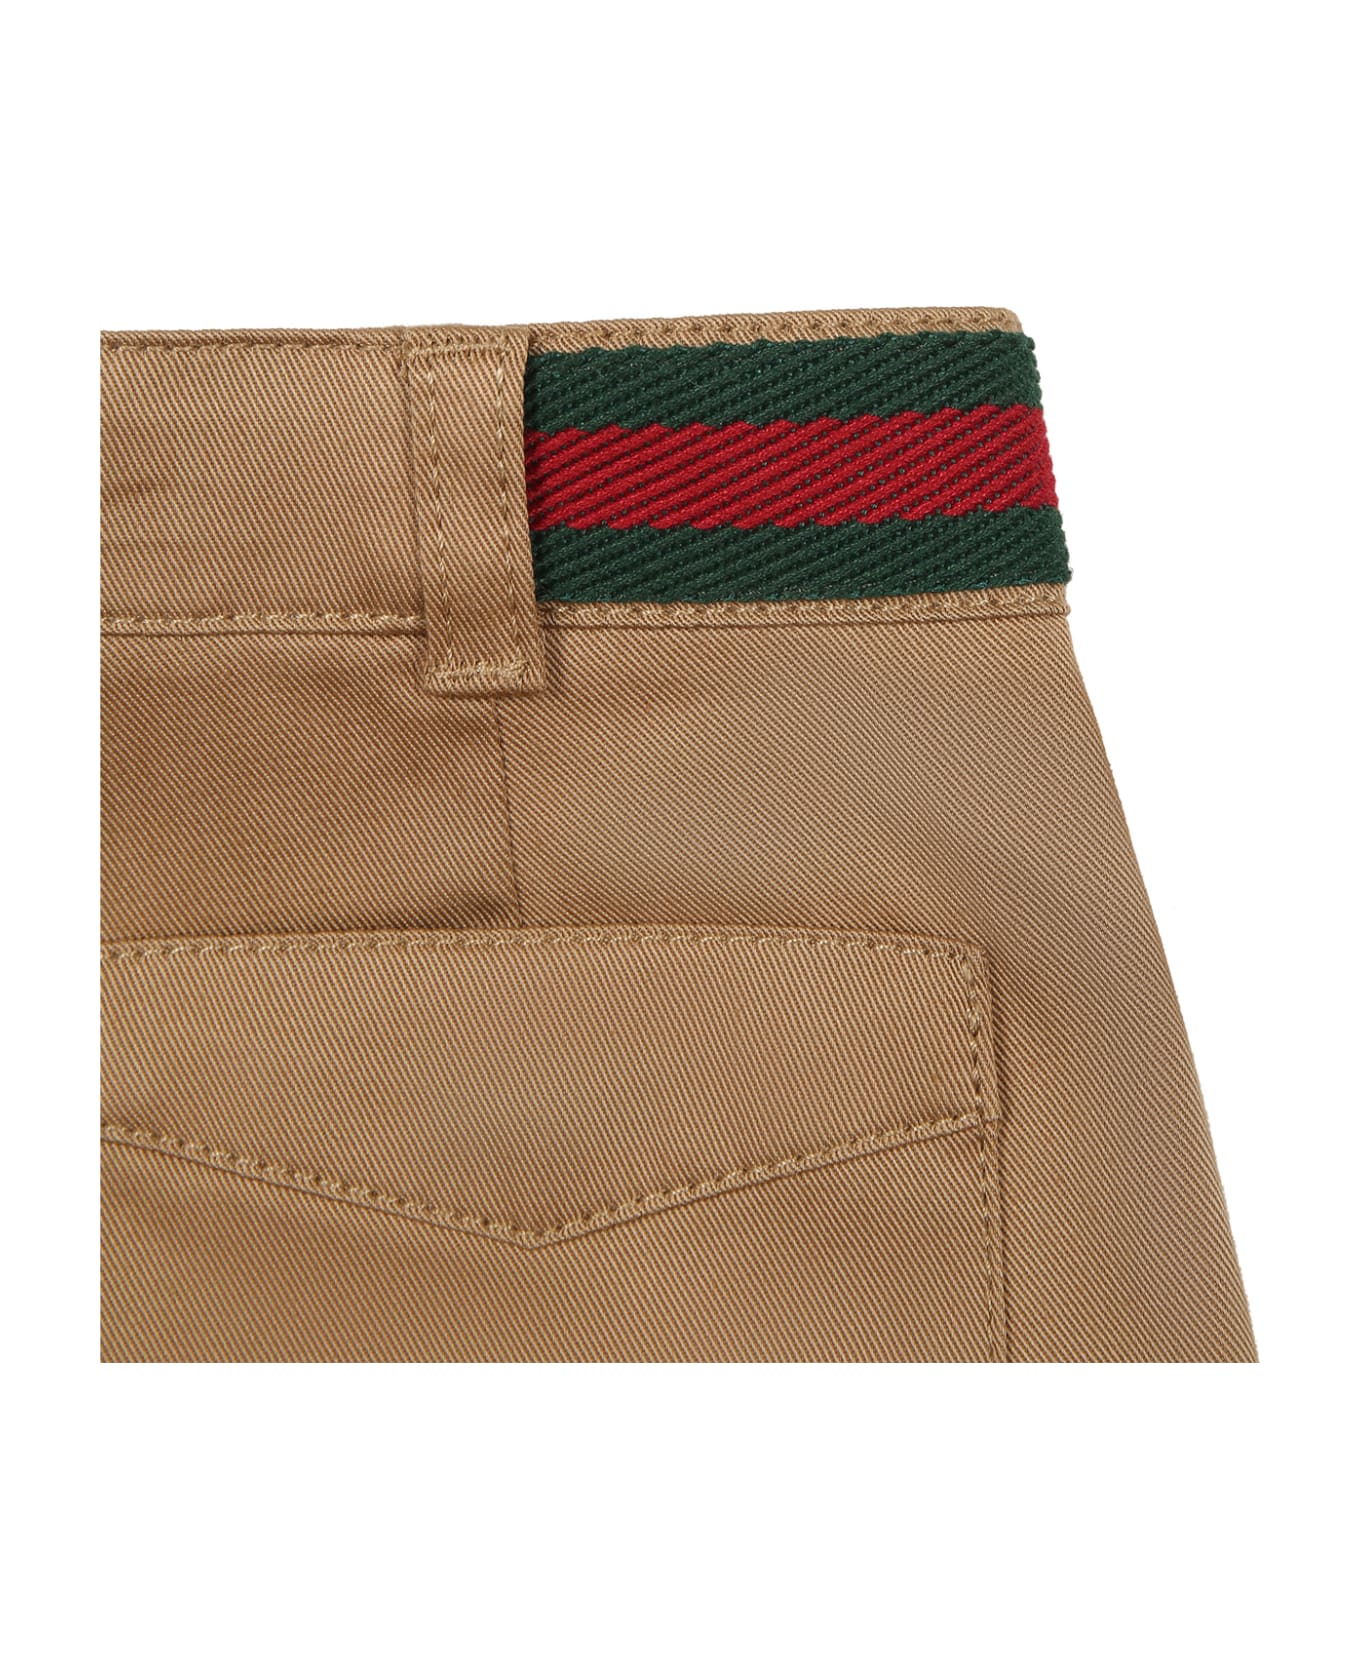 Gucci Beige Shorts For Baby Boy With Web Detail - Blu ボトムス